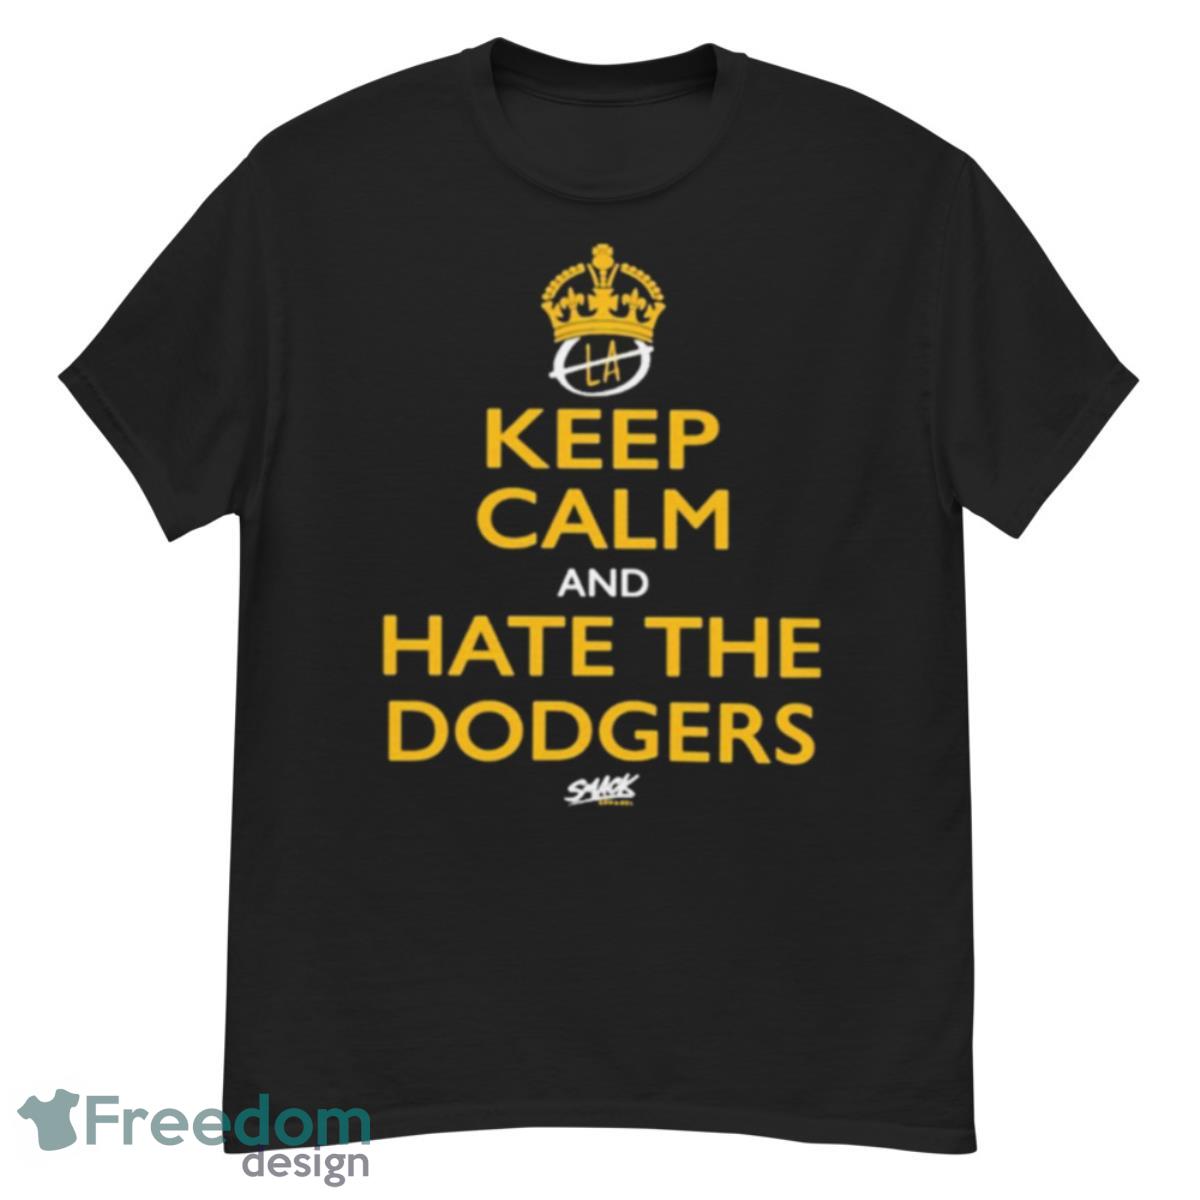 Casual keep calm and hate the Dodgers T shirt - G500 Men’s Classic T-Shirt